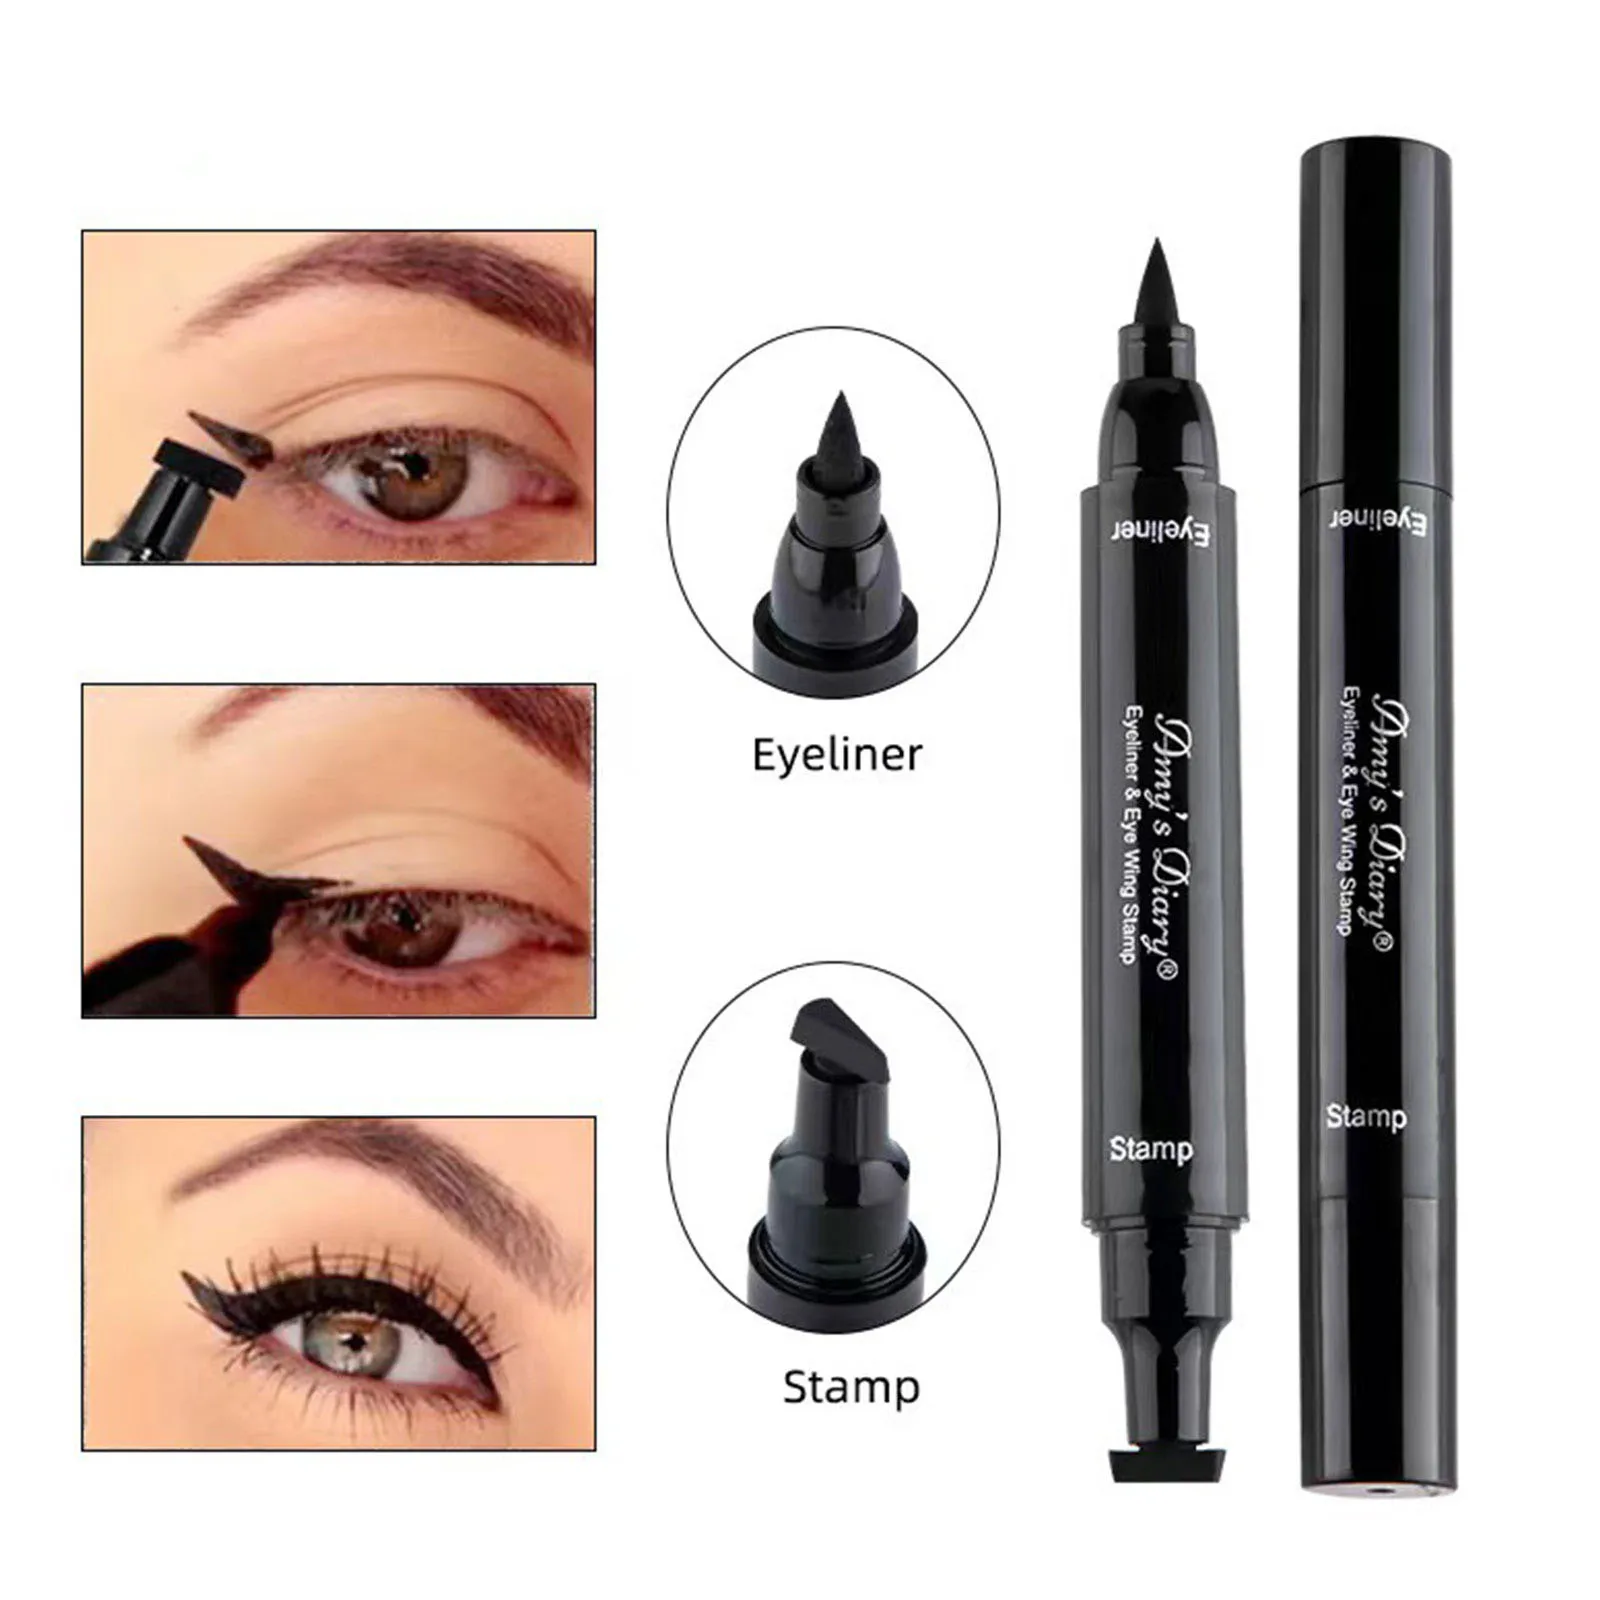 

2 In1 Winged Stamp Liquid Eyeliner Pencil Water Proof Fast Dry Double-ended Black Seal Eye Liner Pen Make Up For Women Cosmetics